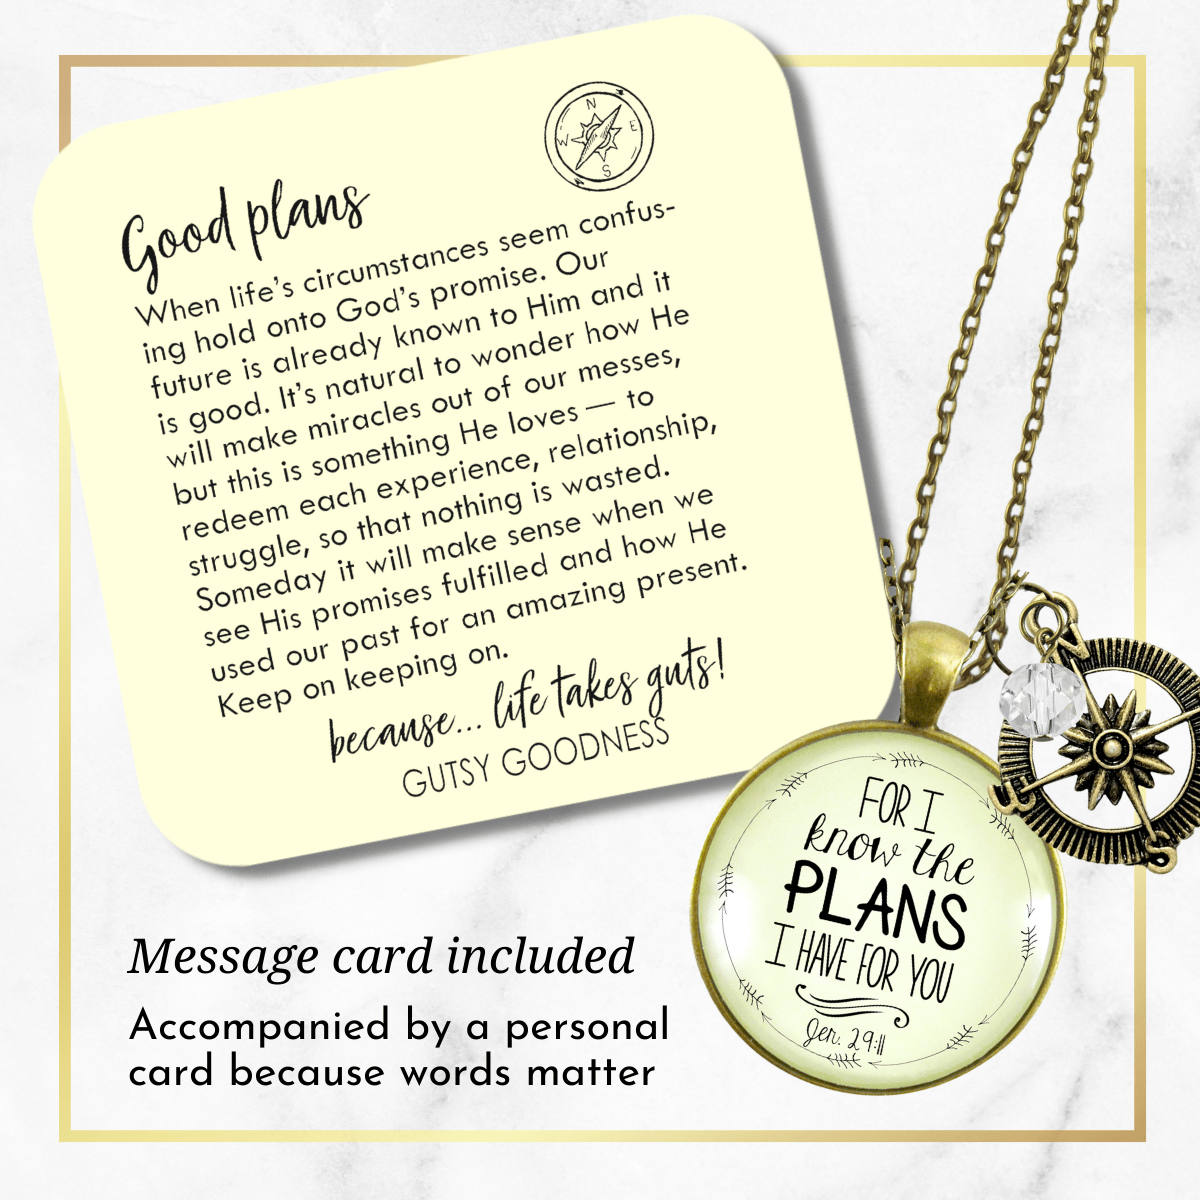 For I Know Plans I Have for You Necklace Faith Inspired Compass Jewelry Clear Bead - Gutsy Goodness